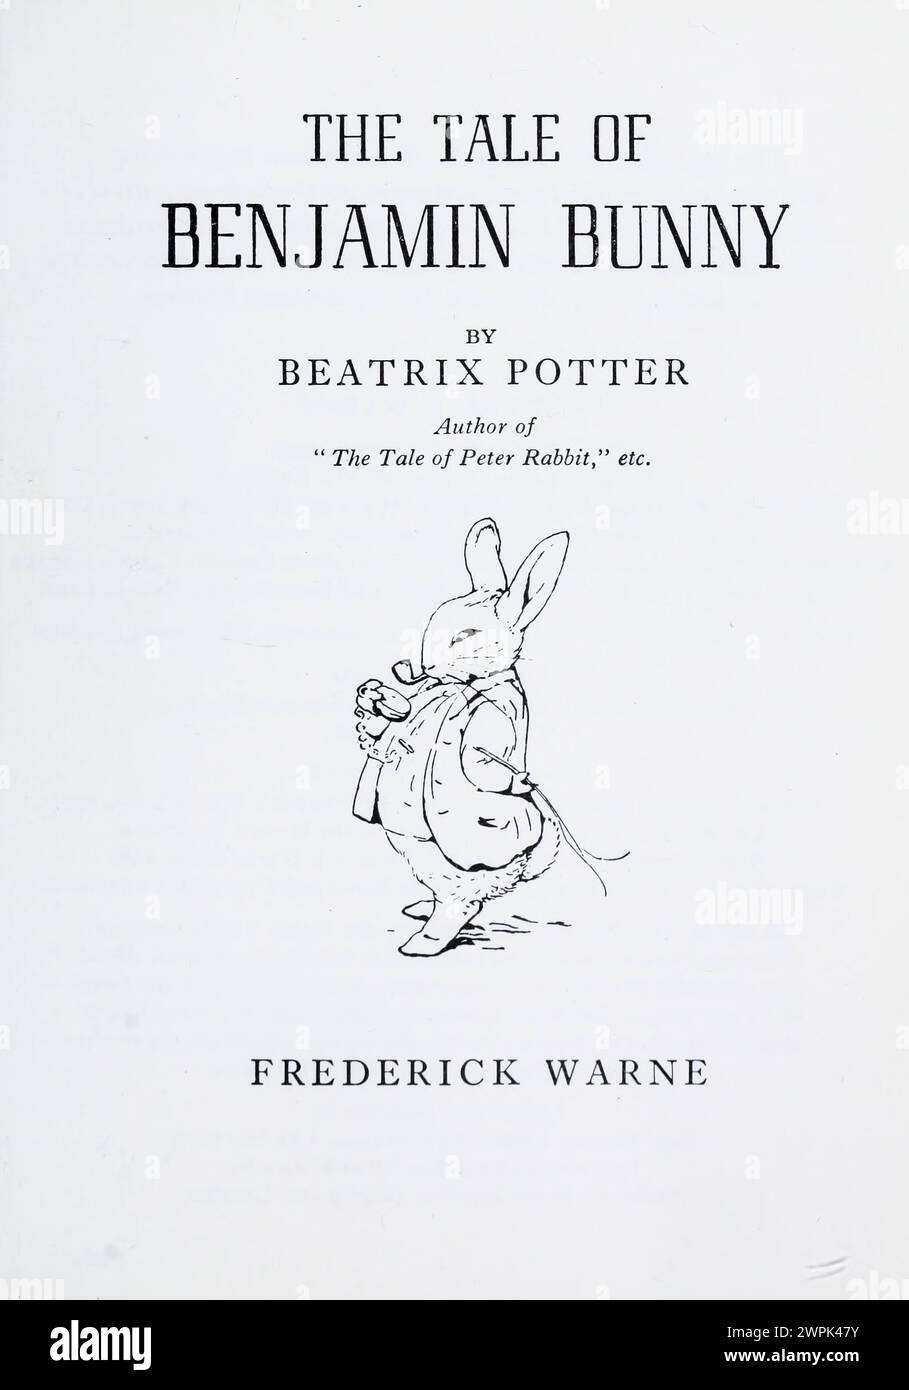 title page The Tale of Benjamin Bunny is a children's book written and illustrated by Beatrix Potter, and first published by Frederick Warne & Co. in September 1904. The book is a sequel to The Tale of Peter Rabbit (1902), and tells of Peter's return to Mr. McGregor's garden with his cousin Benjamin to retrieve the clothes he lost there during his previous adventure. Stock Photo